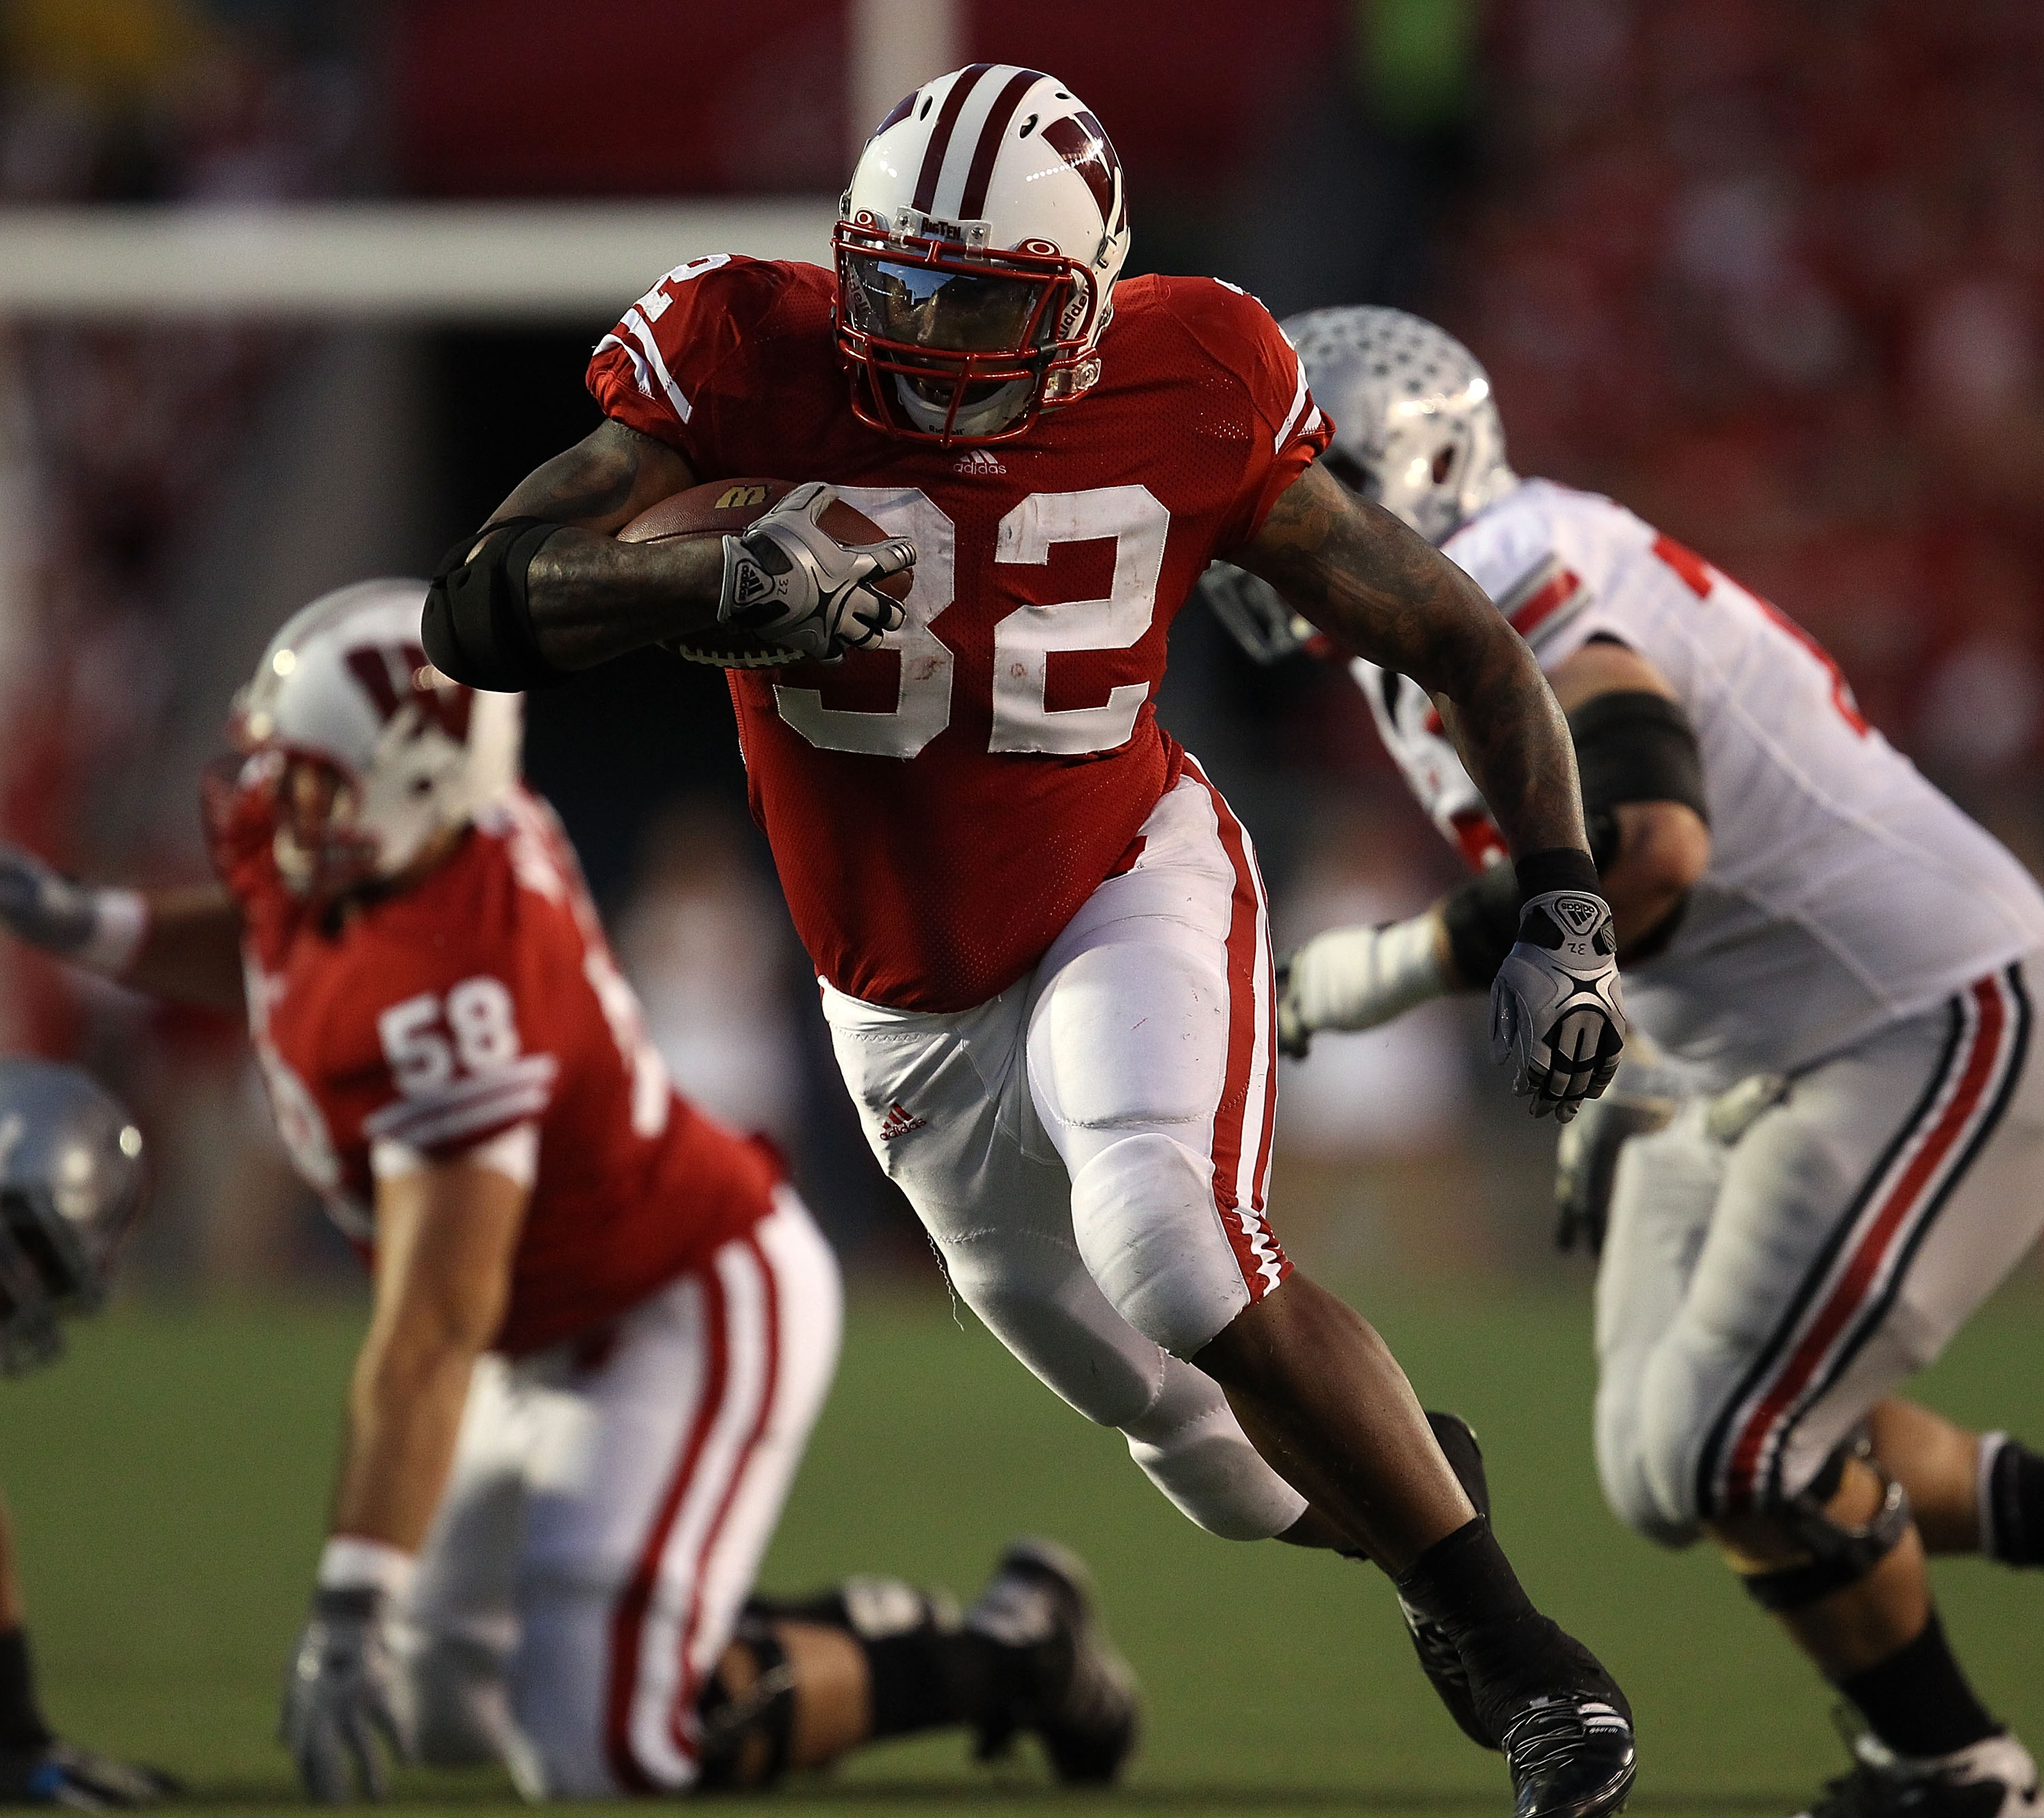 MADISON, WI - OCTOBER 16: John Clay #32 of the Wisconsin Badgers runs for a first down against the Ohio State Buckeyes at Camp Randall Stadium on October 16, 2010 in Madison, Wisconsin. (Photo by Jonathan Daniel/Getty Images)